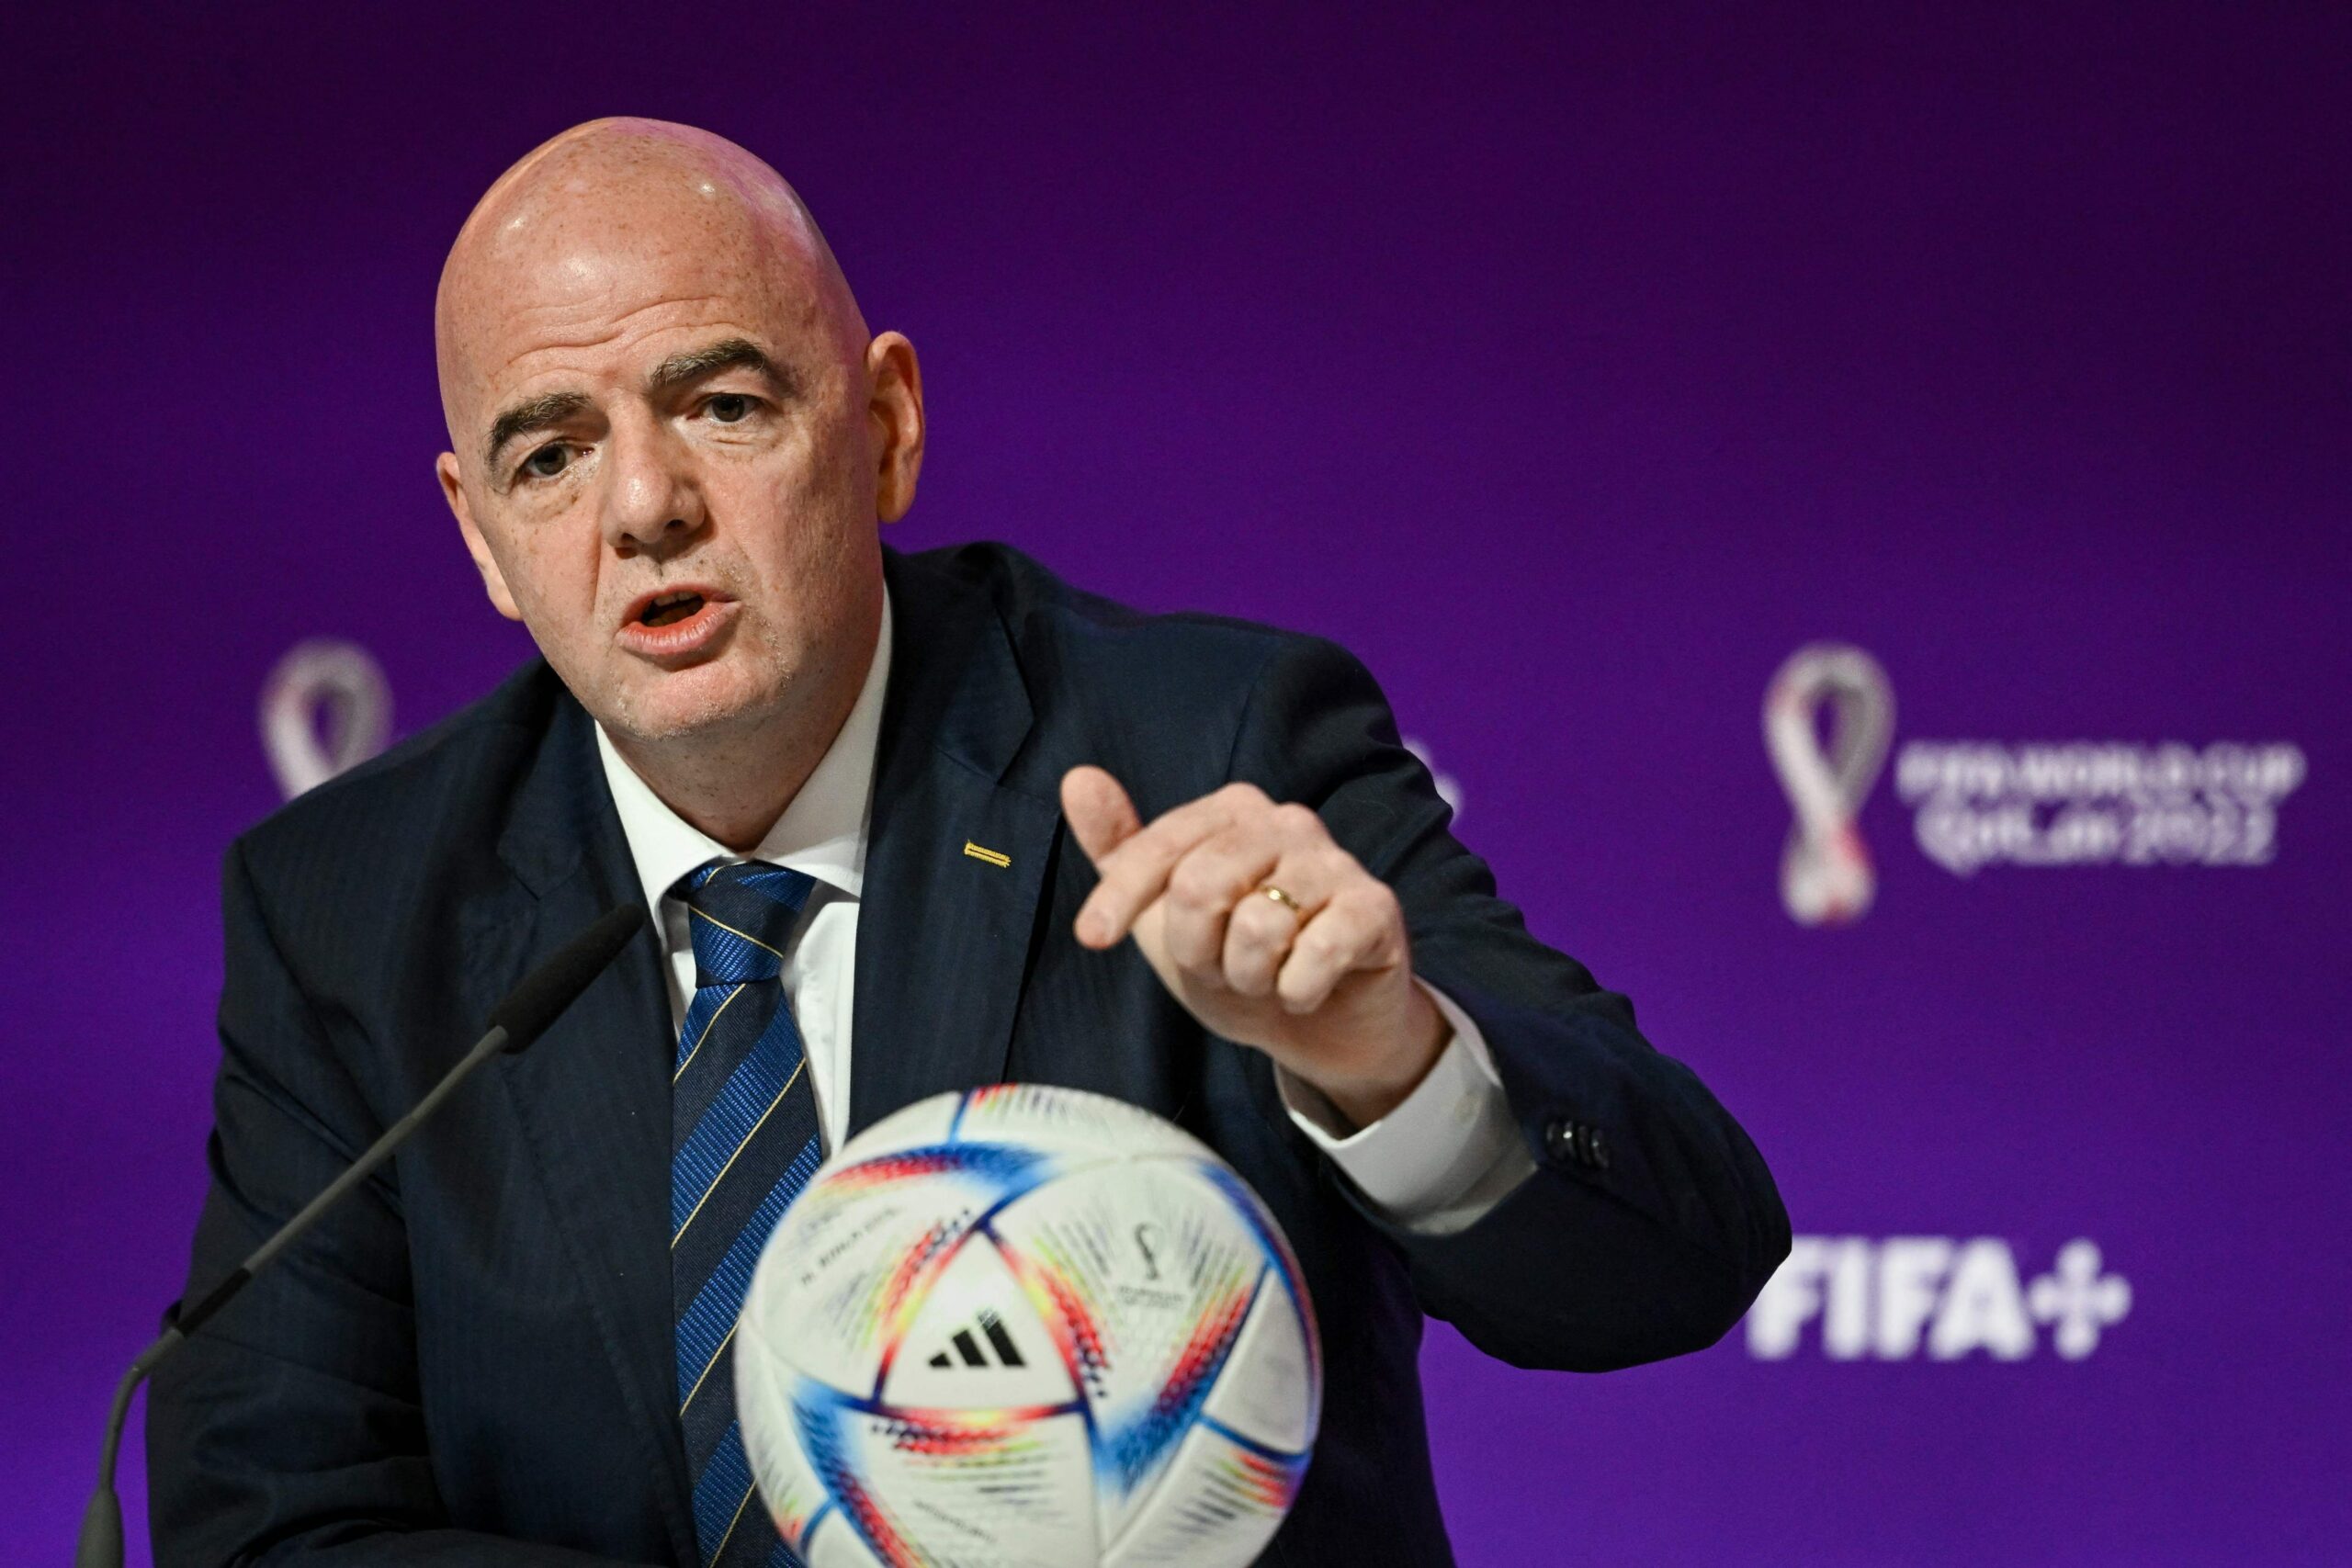 “It will always be the best football video game”, explains Gianni Infantino about the future of the FIFA saga